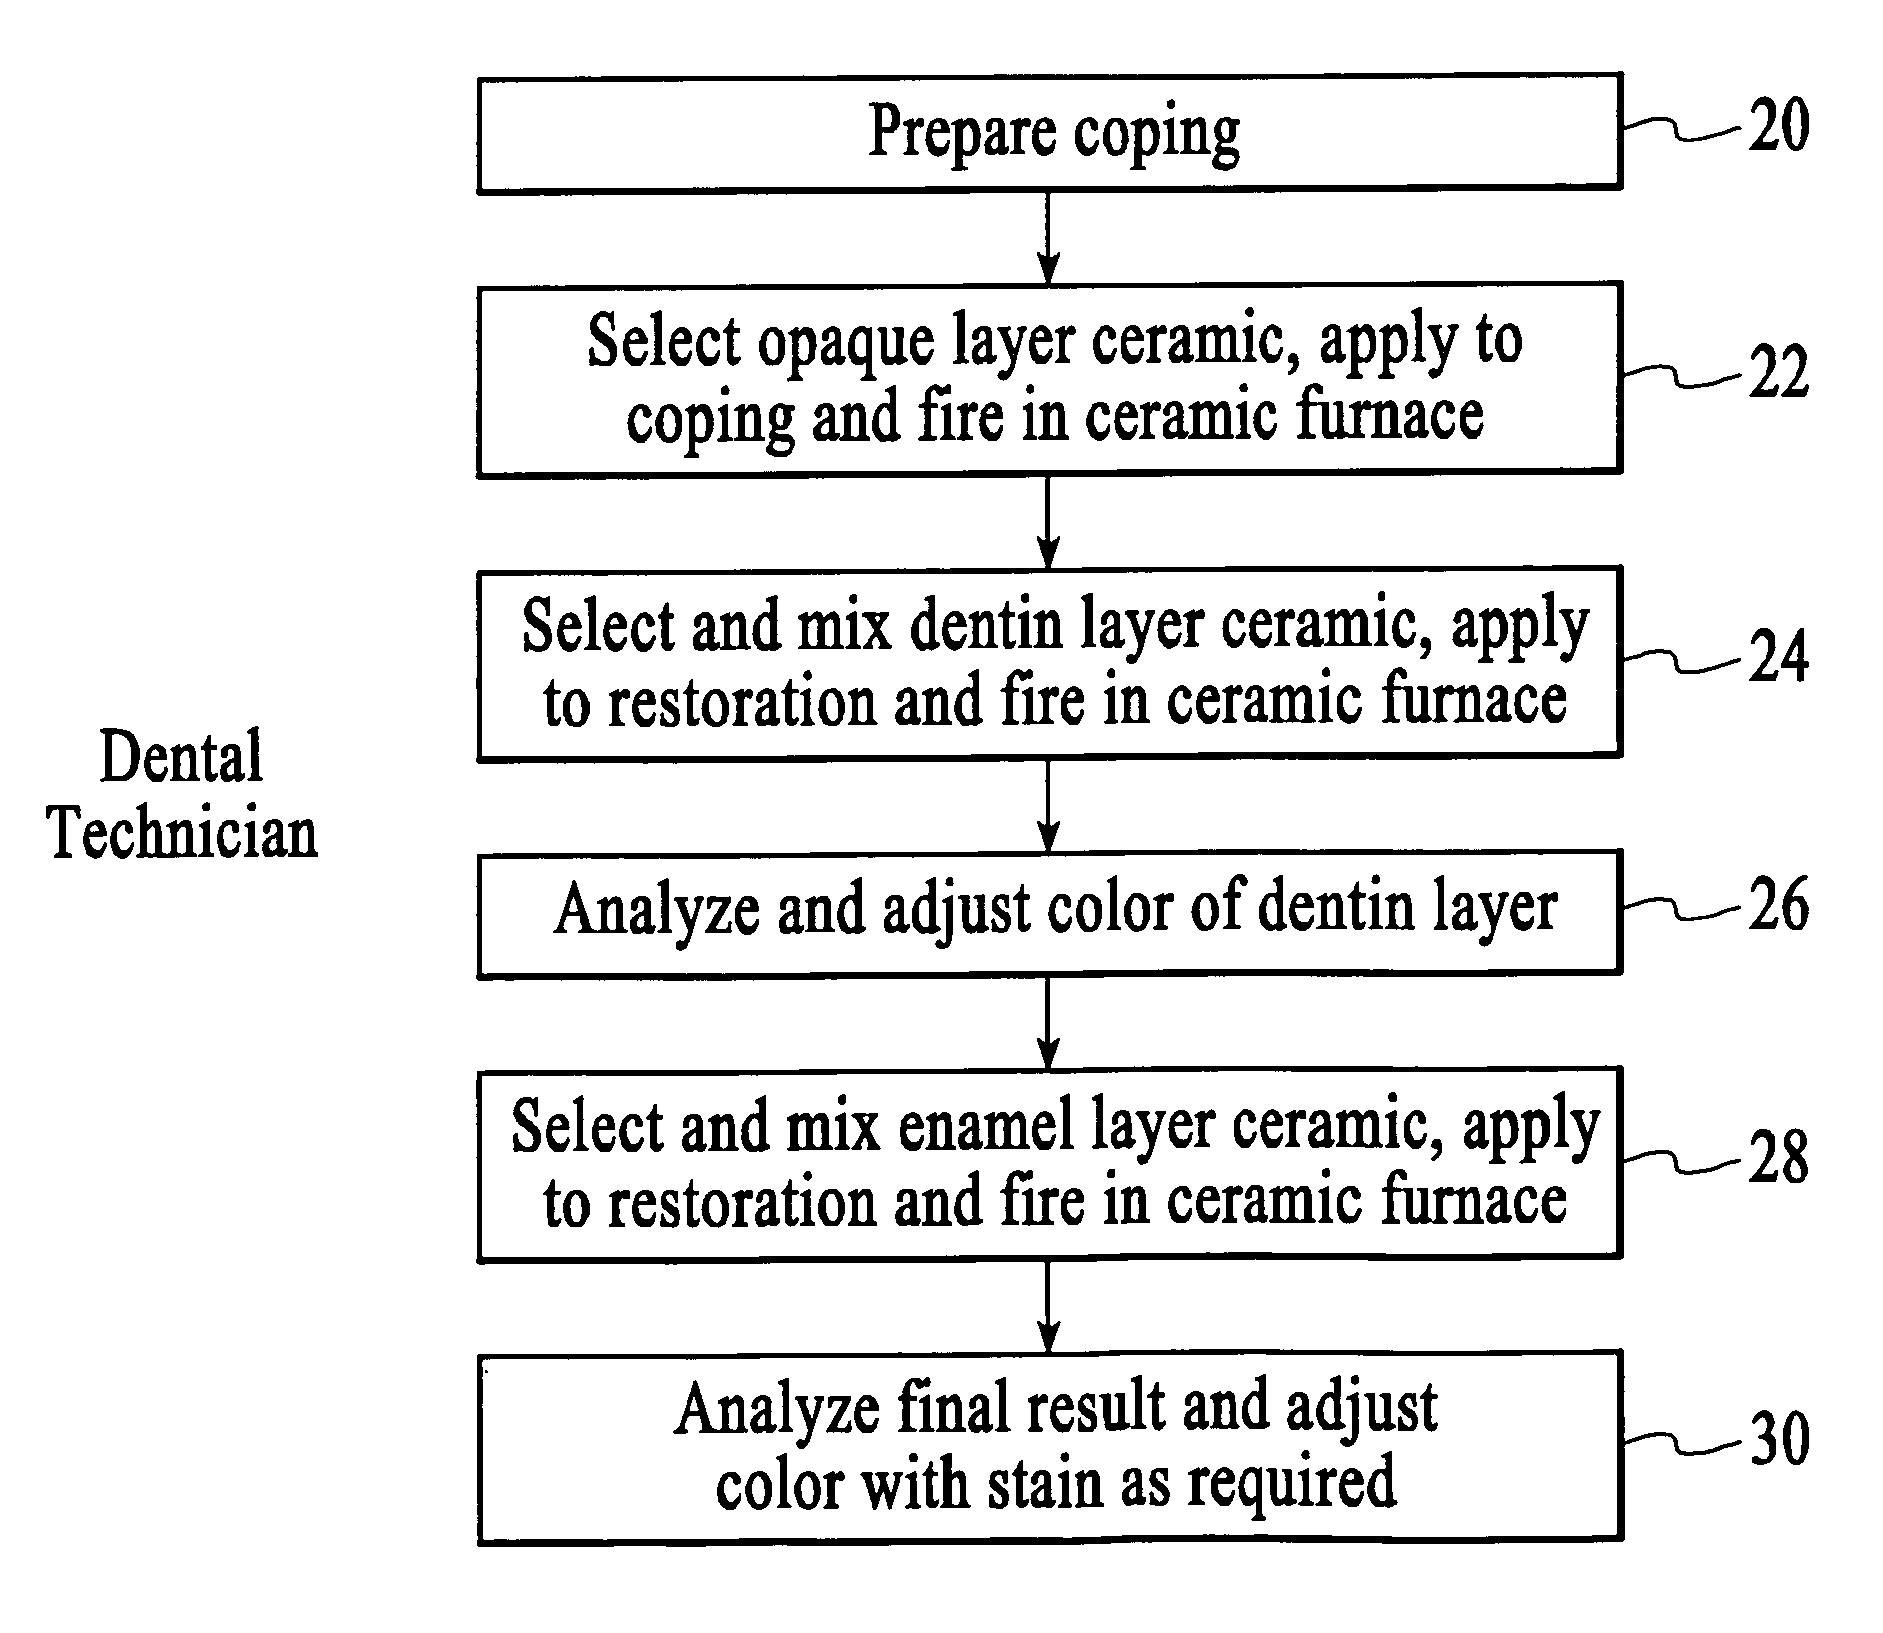 Systems and methods for preparing dental restorations